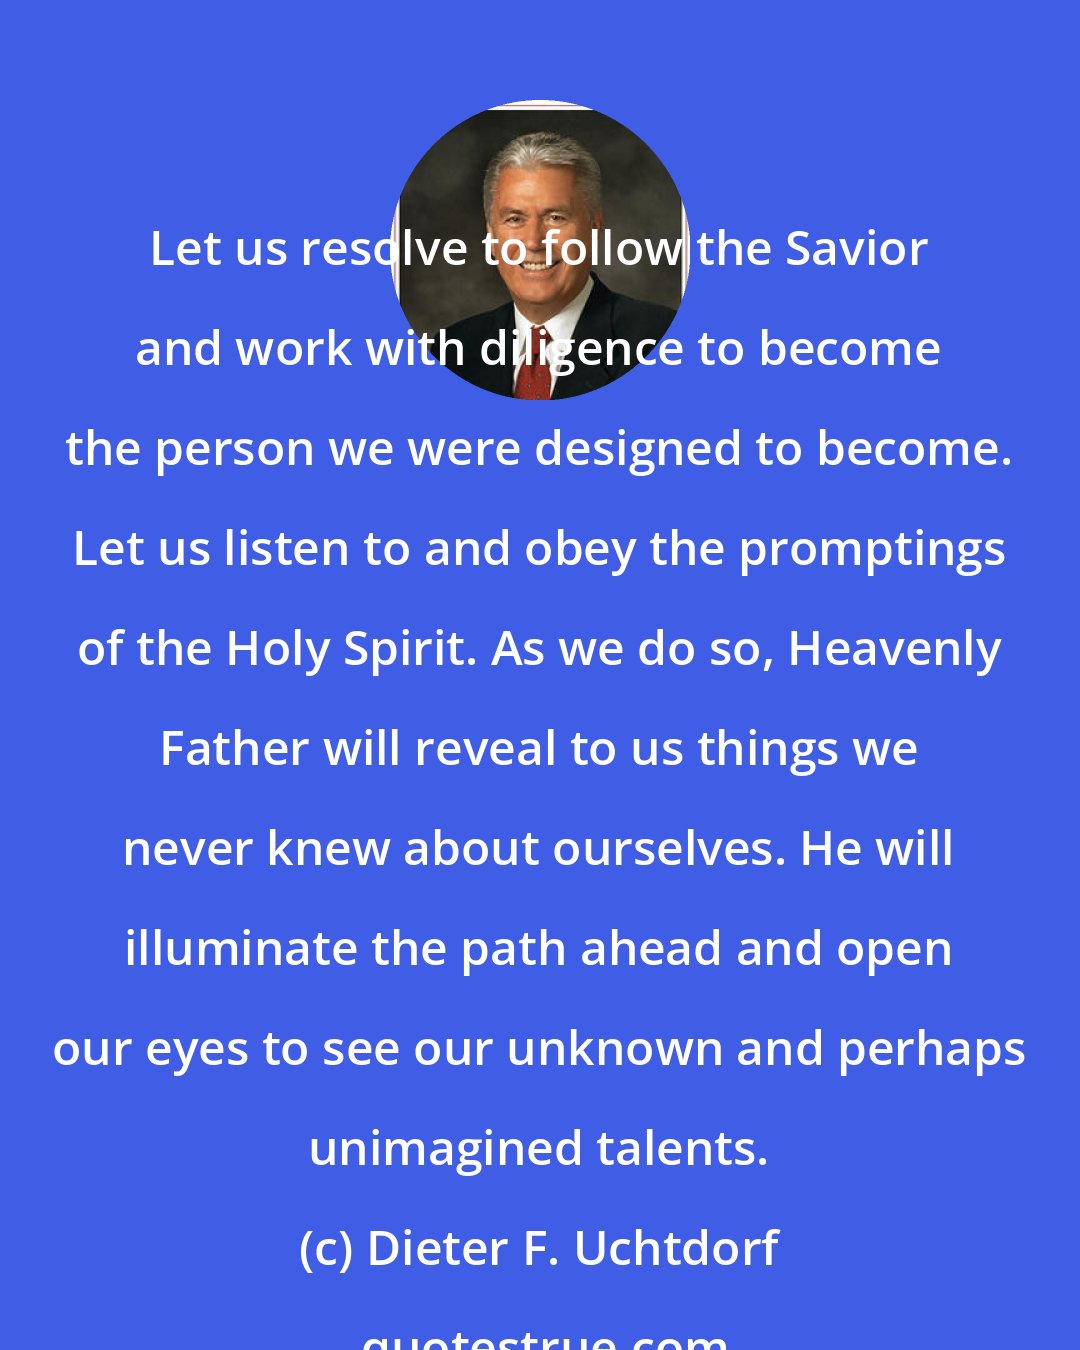 Dieter F. Uchtdorf: Let us resolve to follow the Savior and work with diligence to become the person we were designed to become. Let us listen to and obey the promptings of the Holy Spirit. As we do so, Heavenly Father will reveal to us things we never knew about ourselves. He will illuminate the path ahead and open our eyes to see our unknown and perhaps unimagined talents.